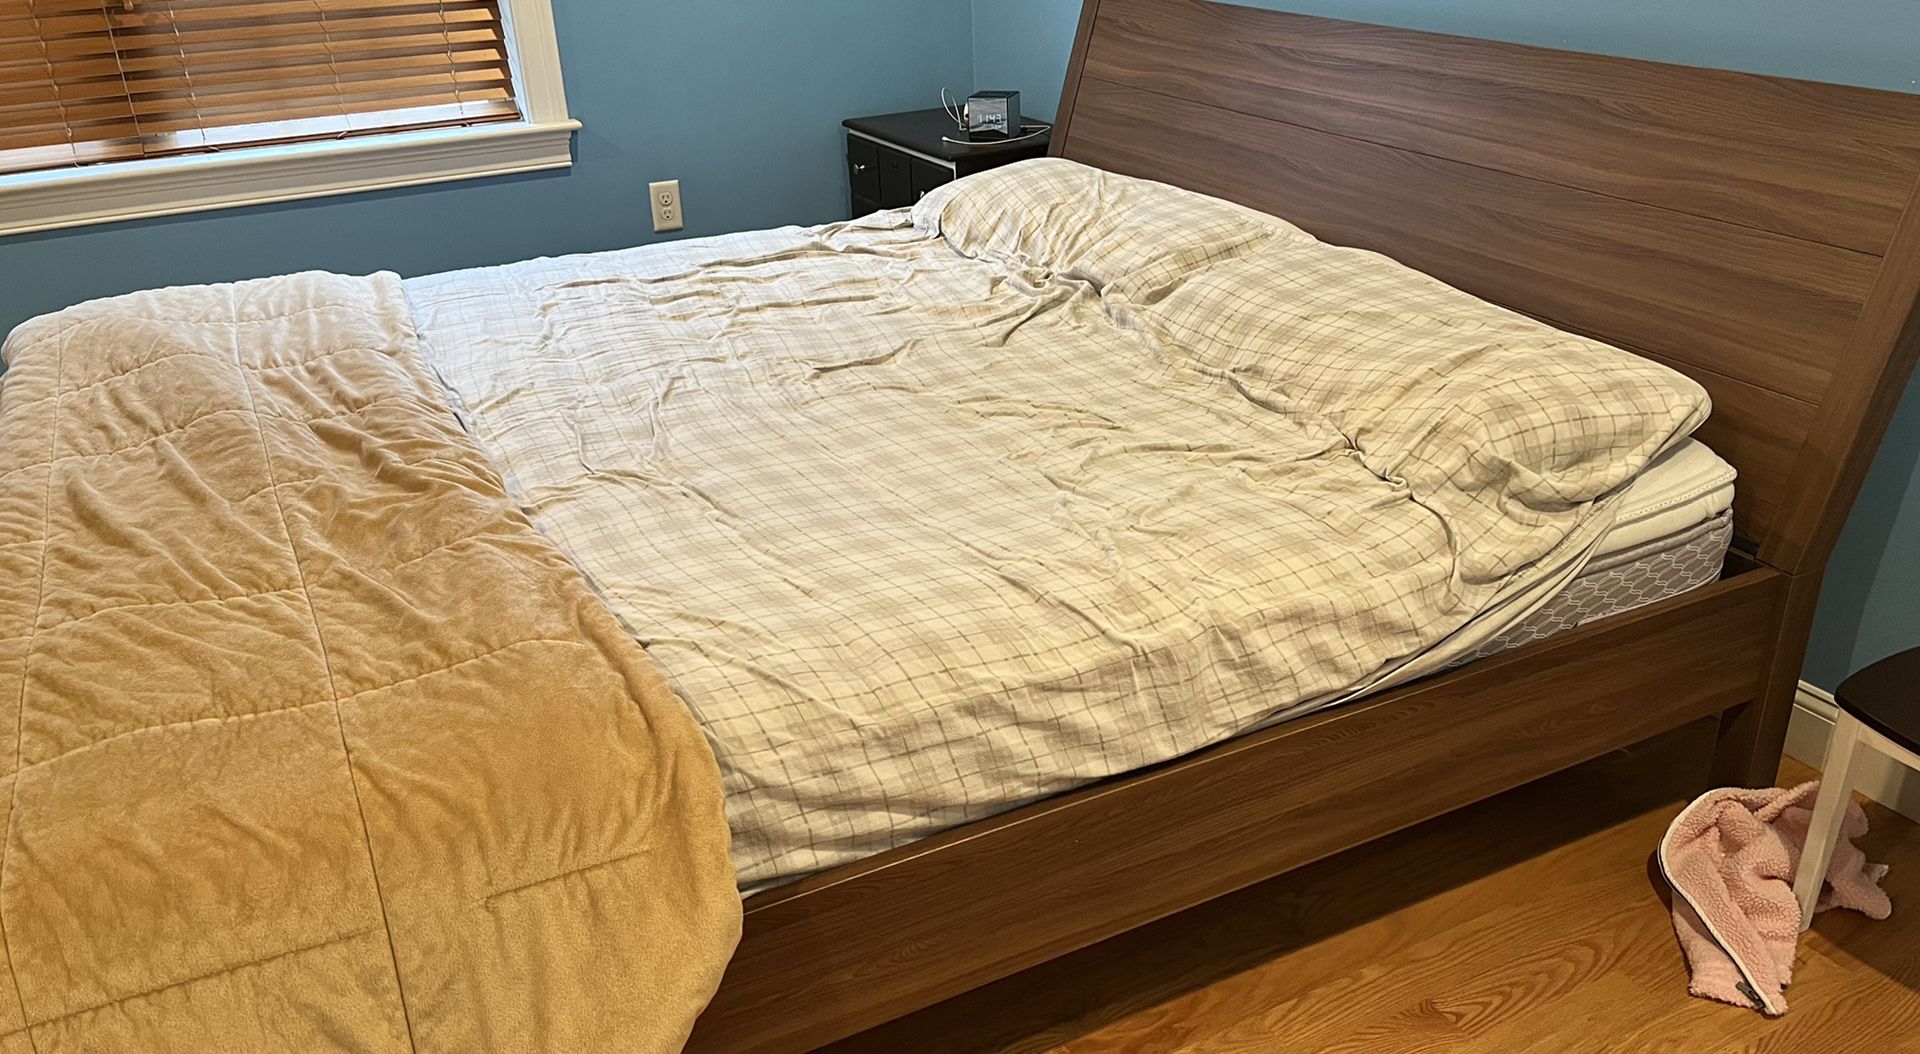 IKEA King Bed With Pillow Tip Mattress-$400